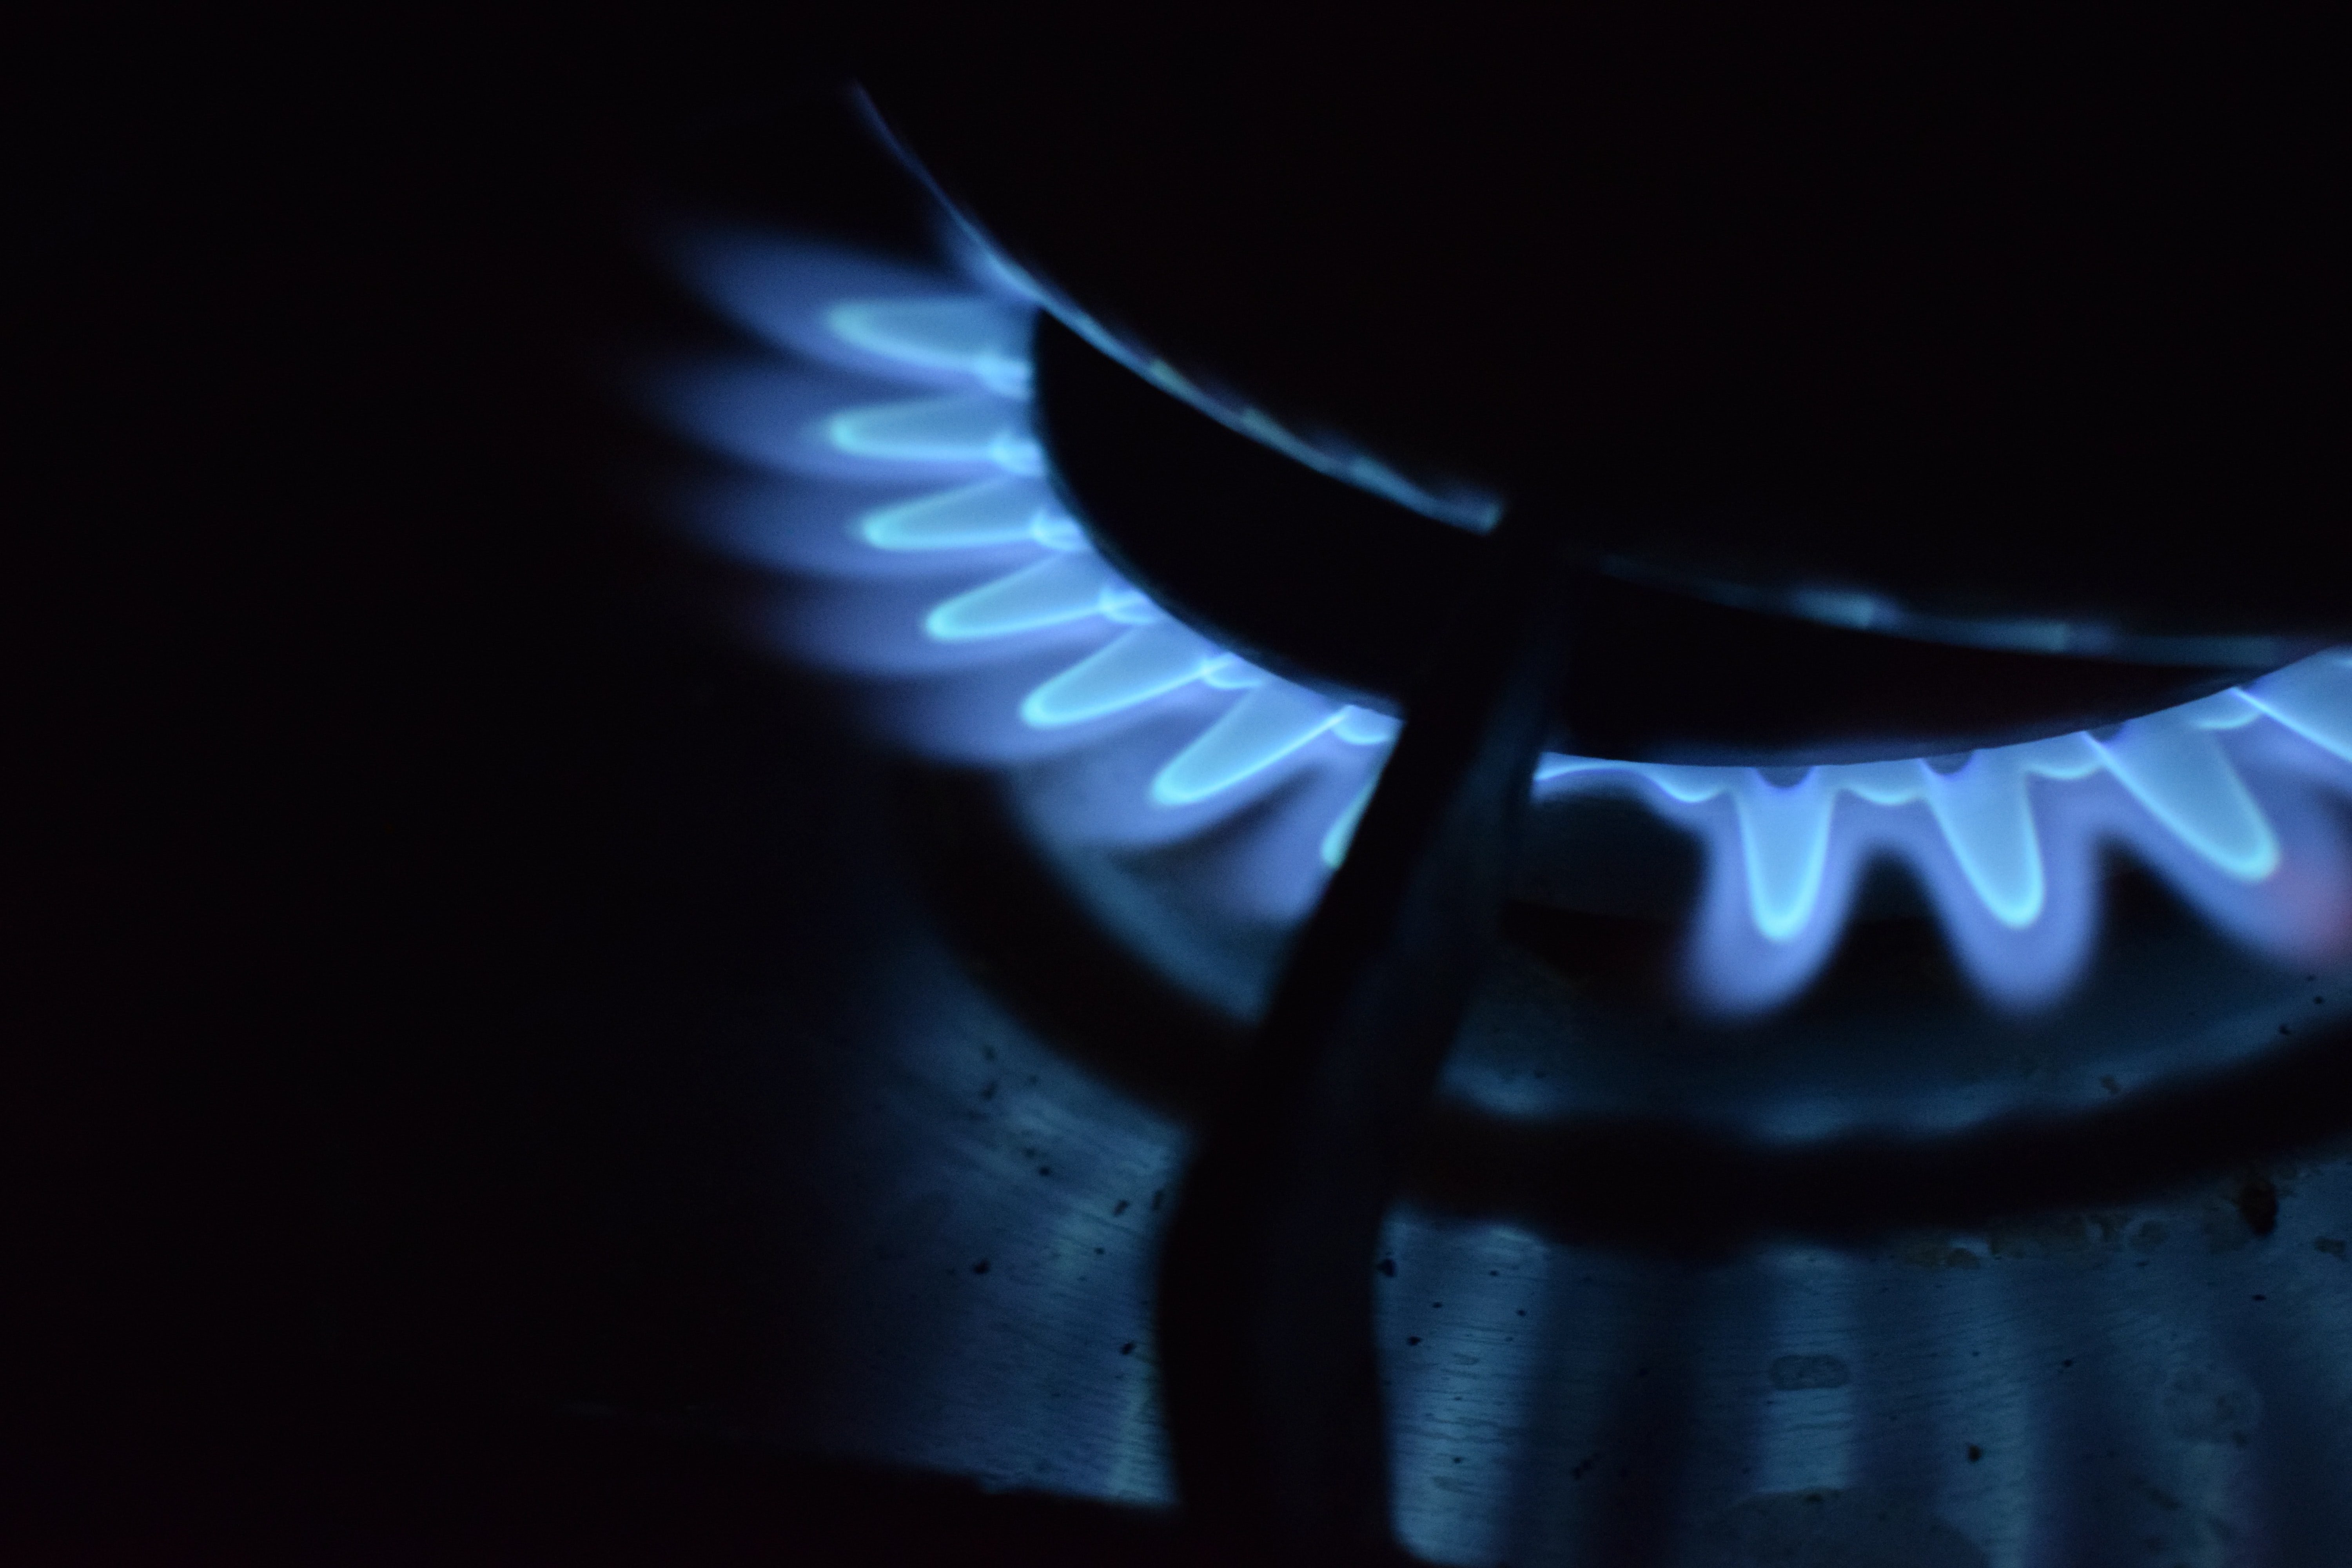 Gas hob with blue flames